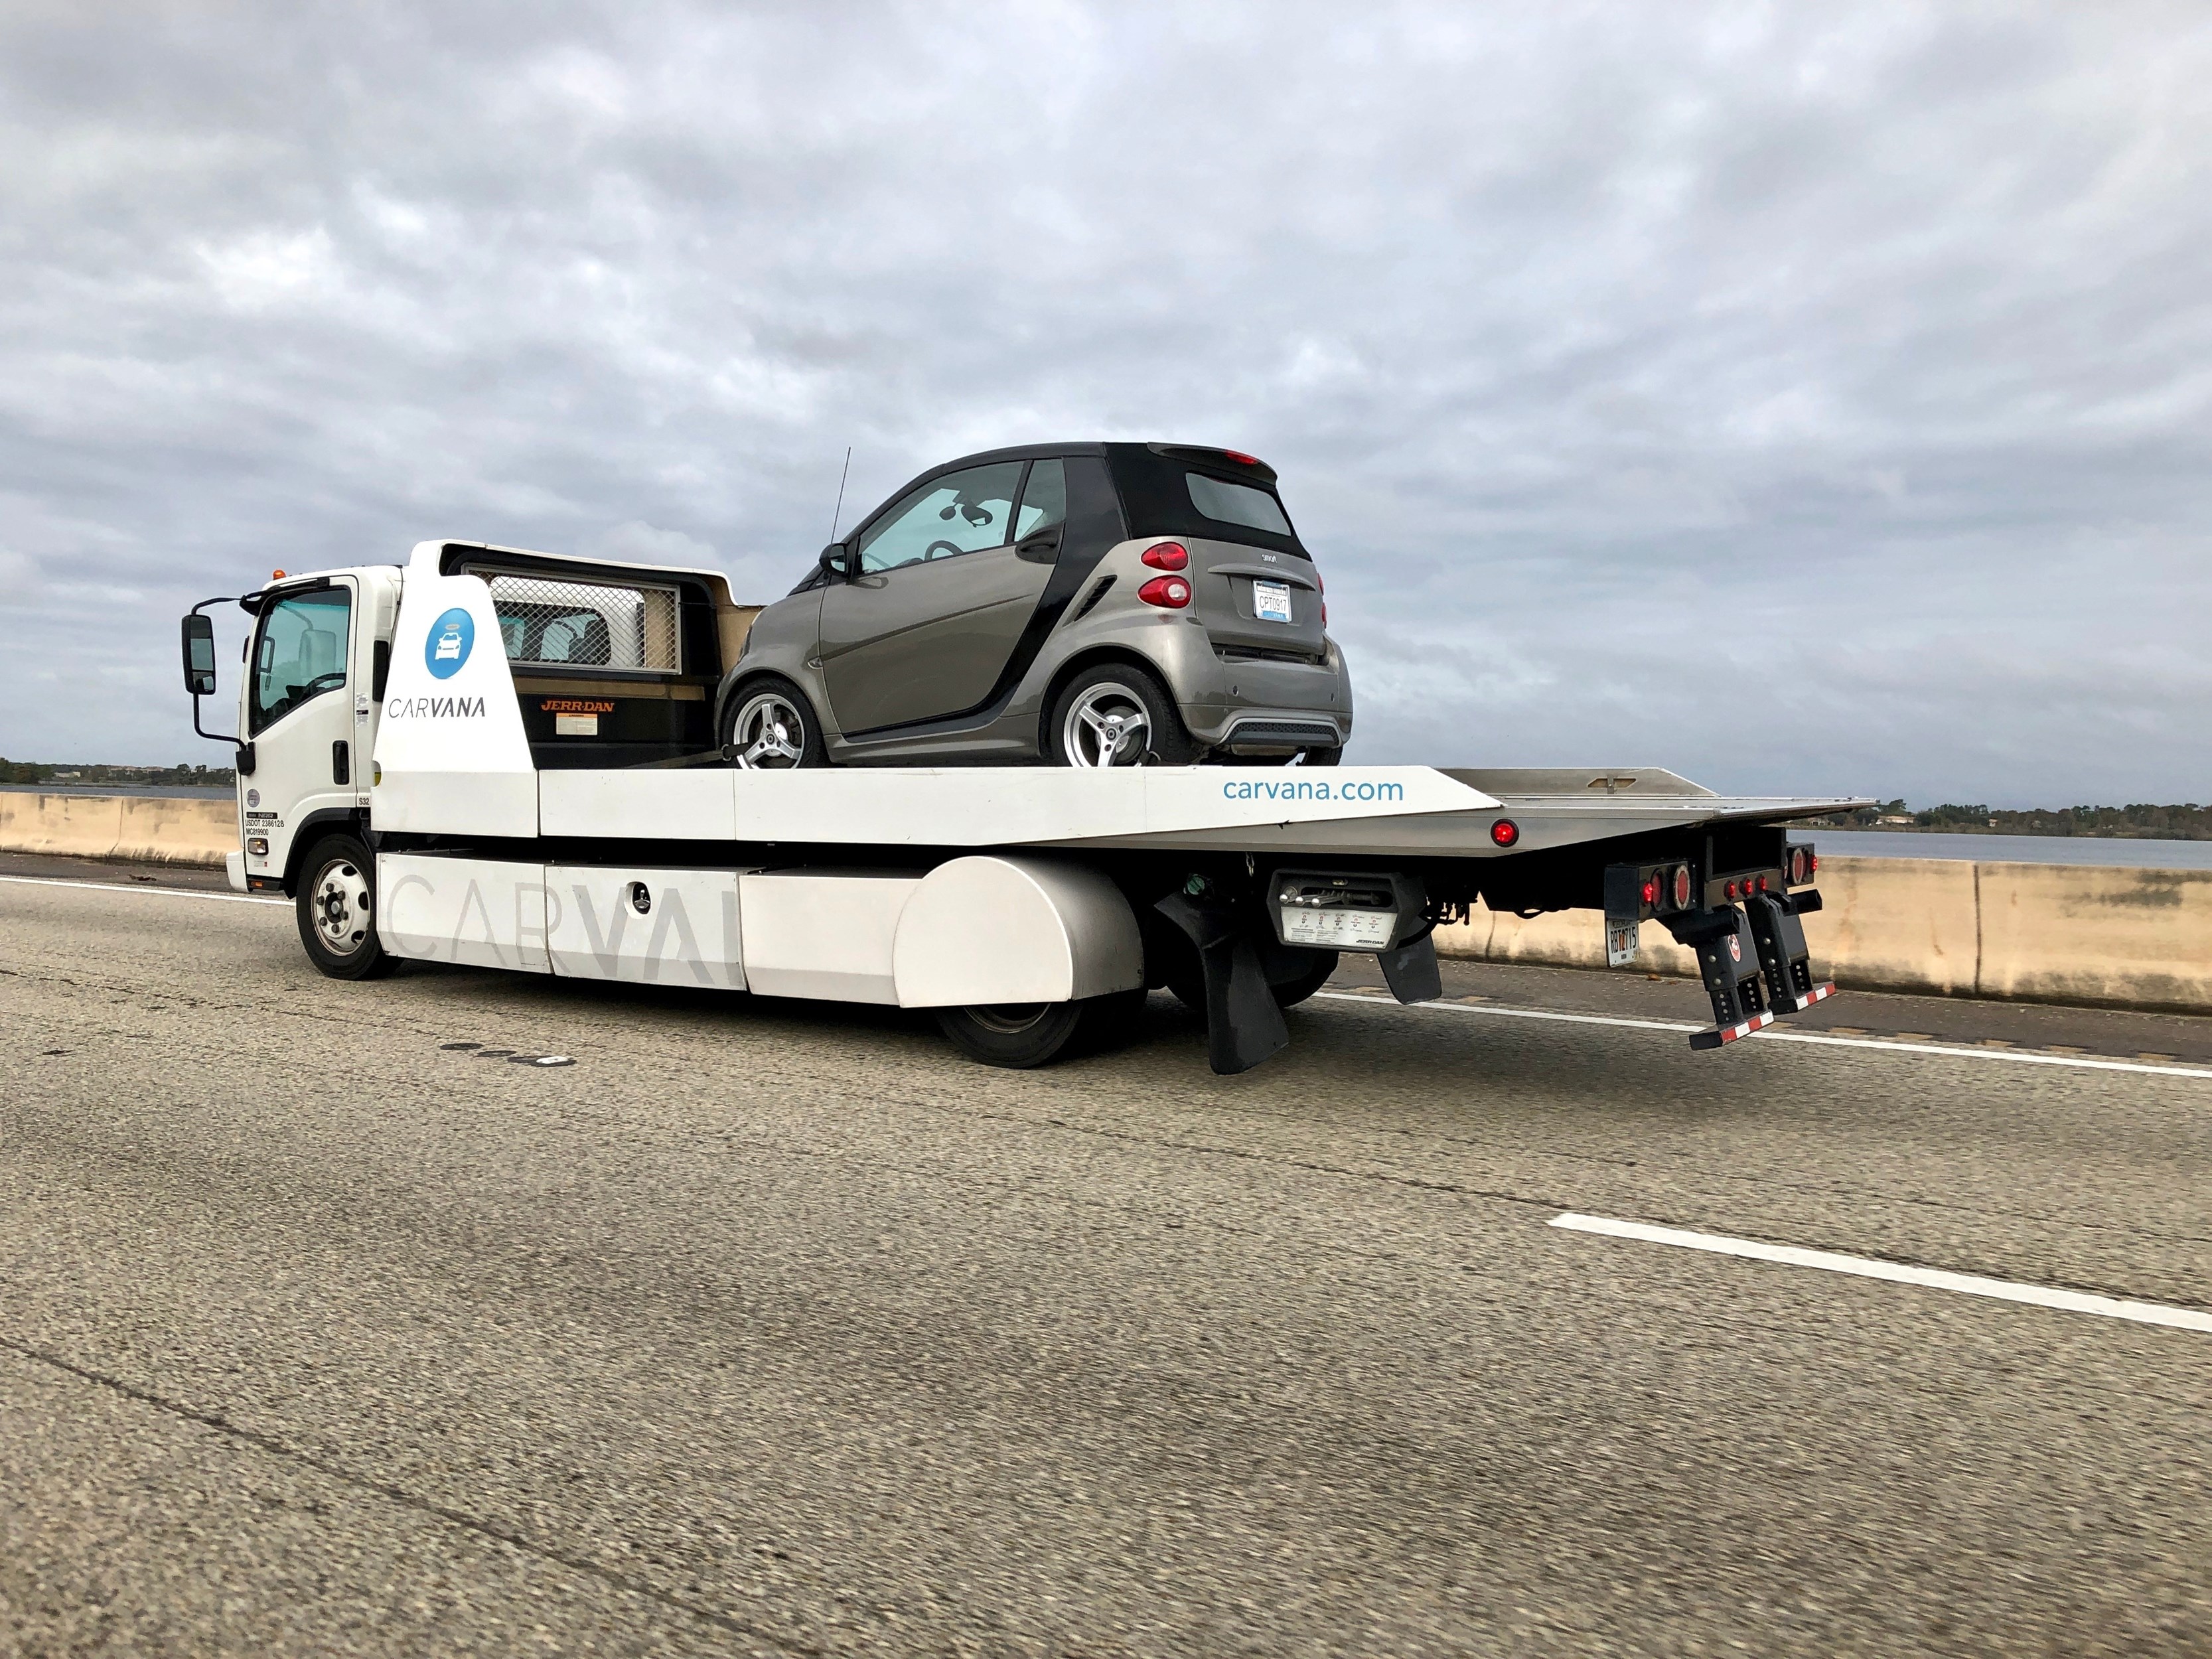 Carvana trucking delivering a used car